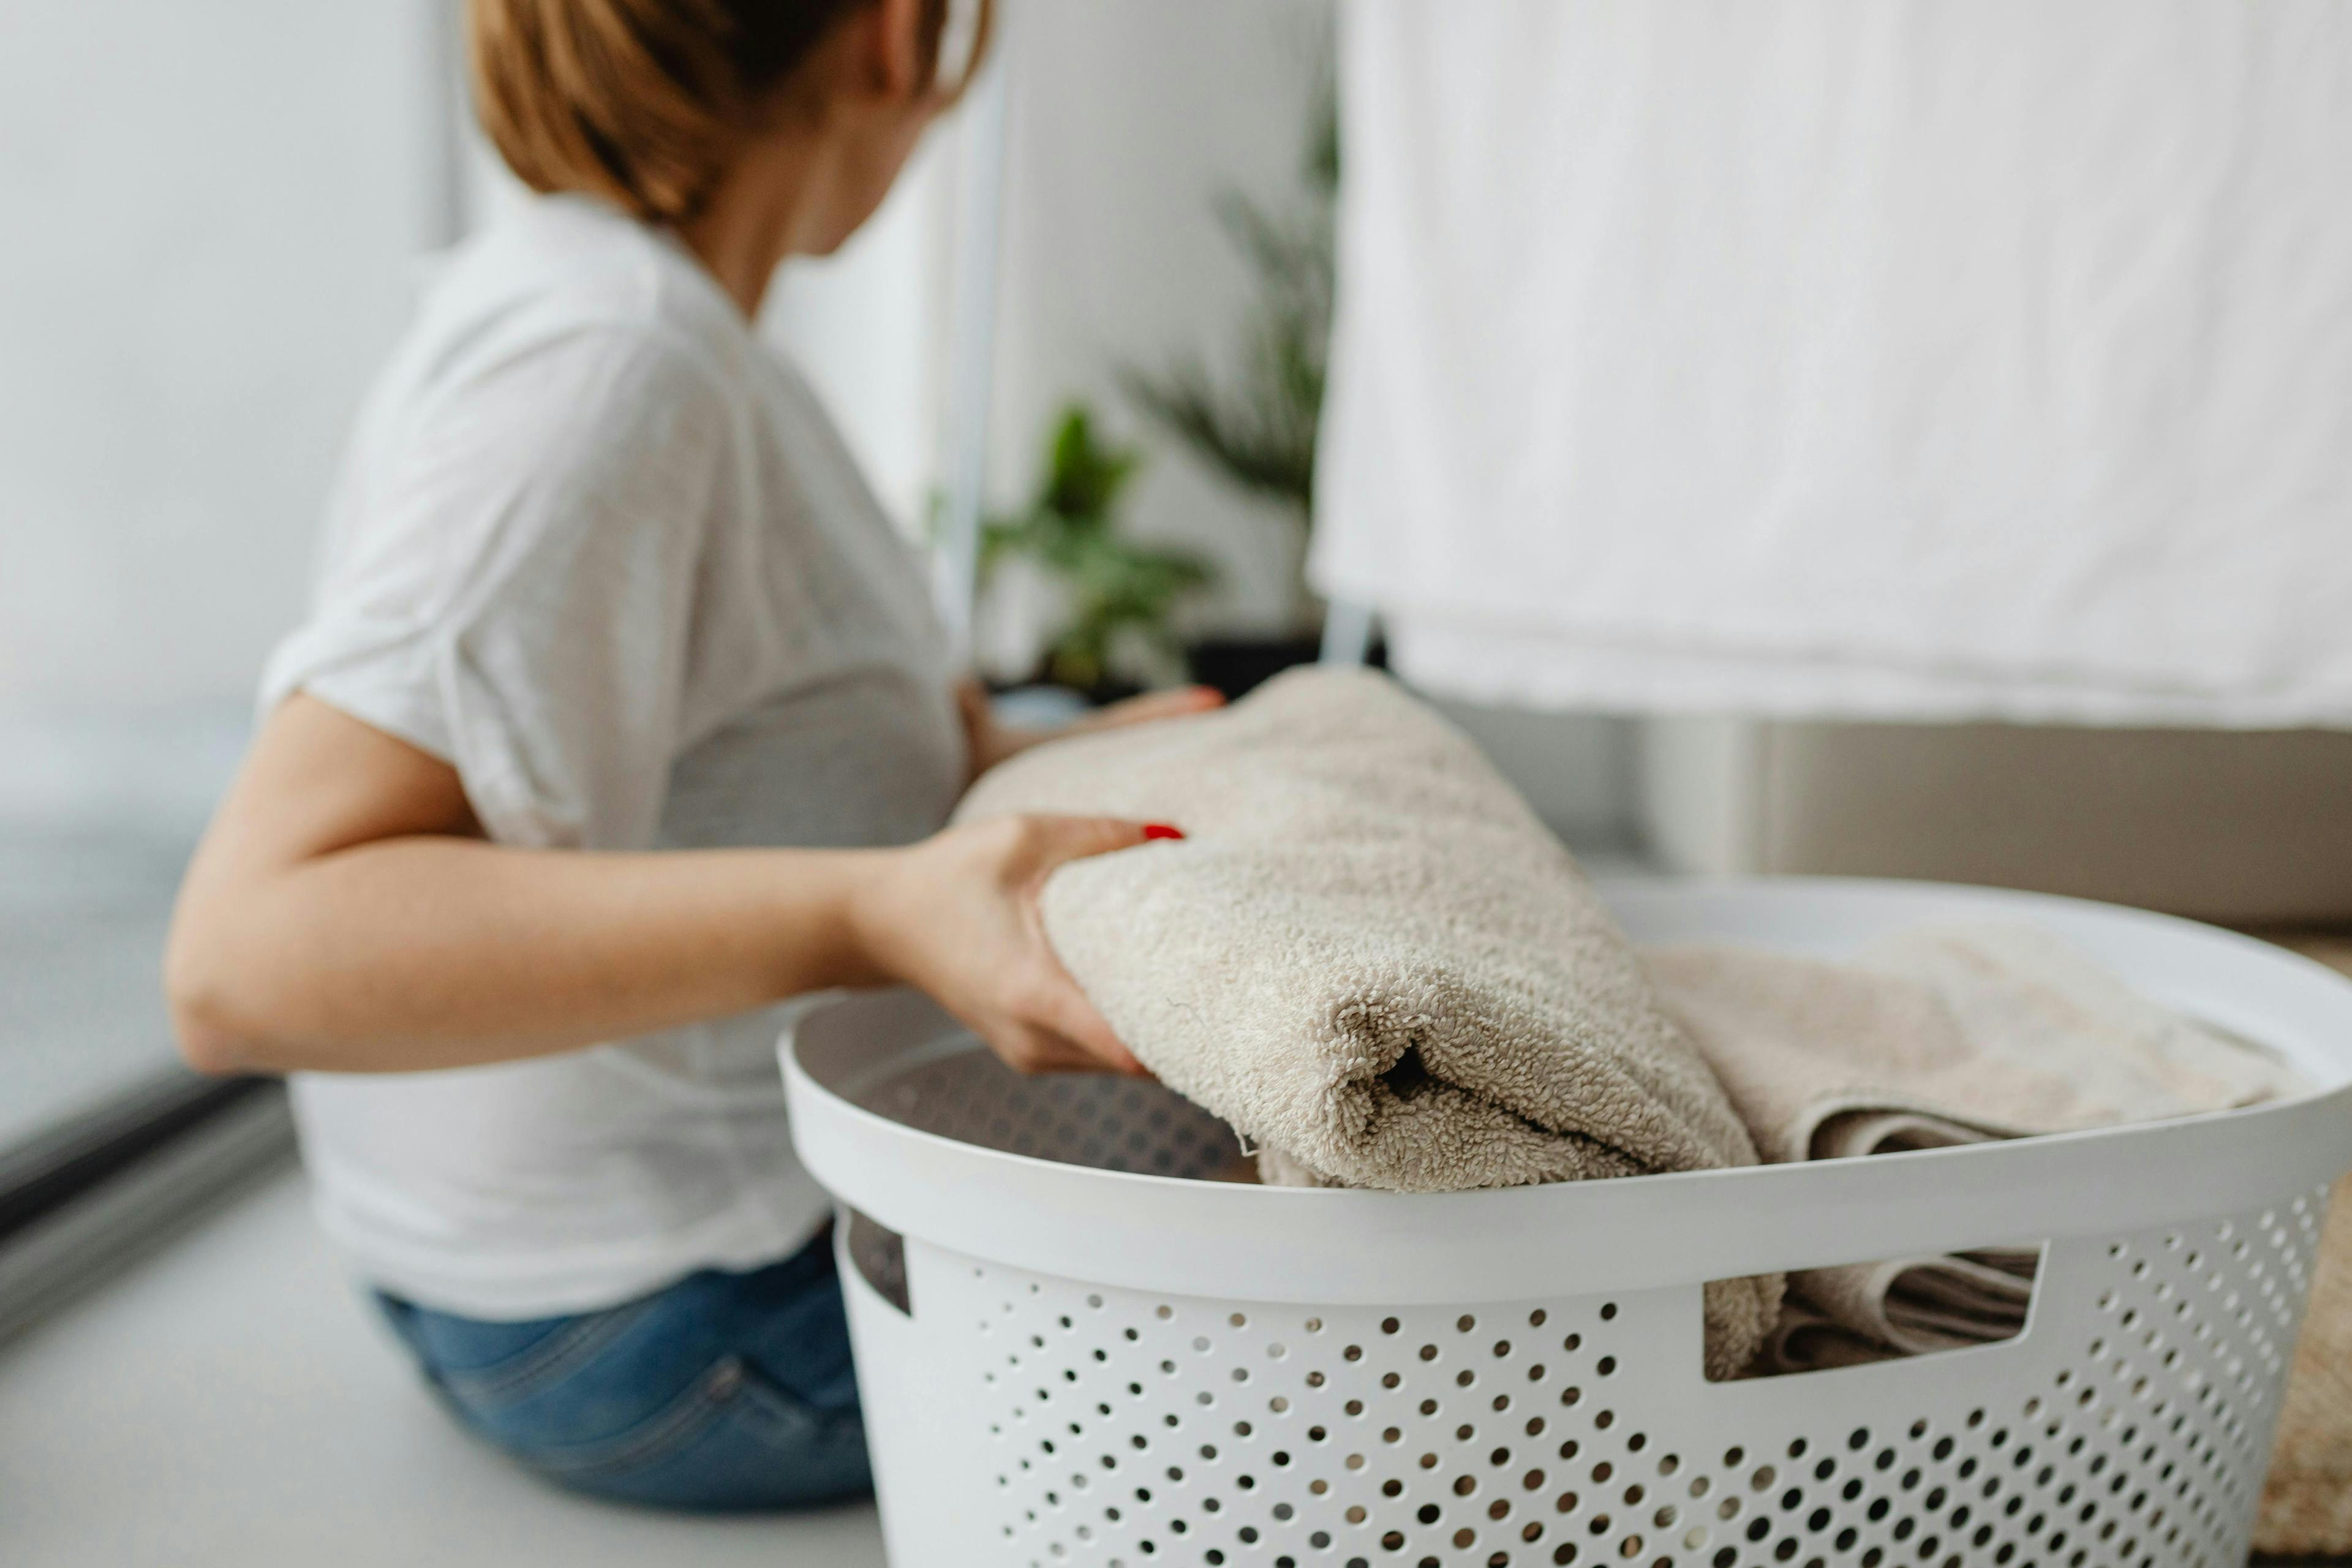 A person folding beige towels into a white laundry basket while seated indoors, with blurred plants and drying clothes in the background.